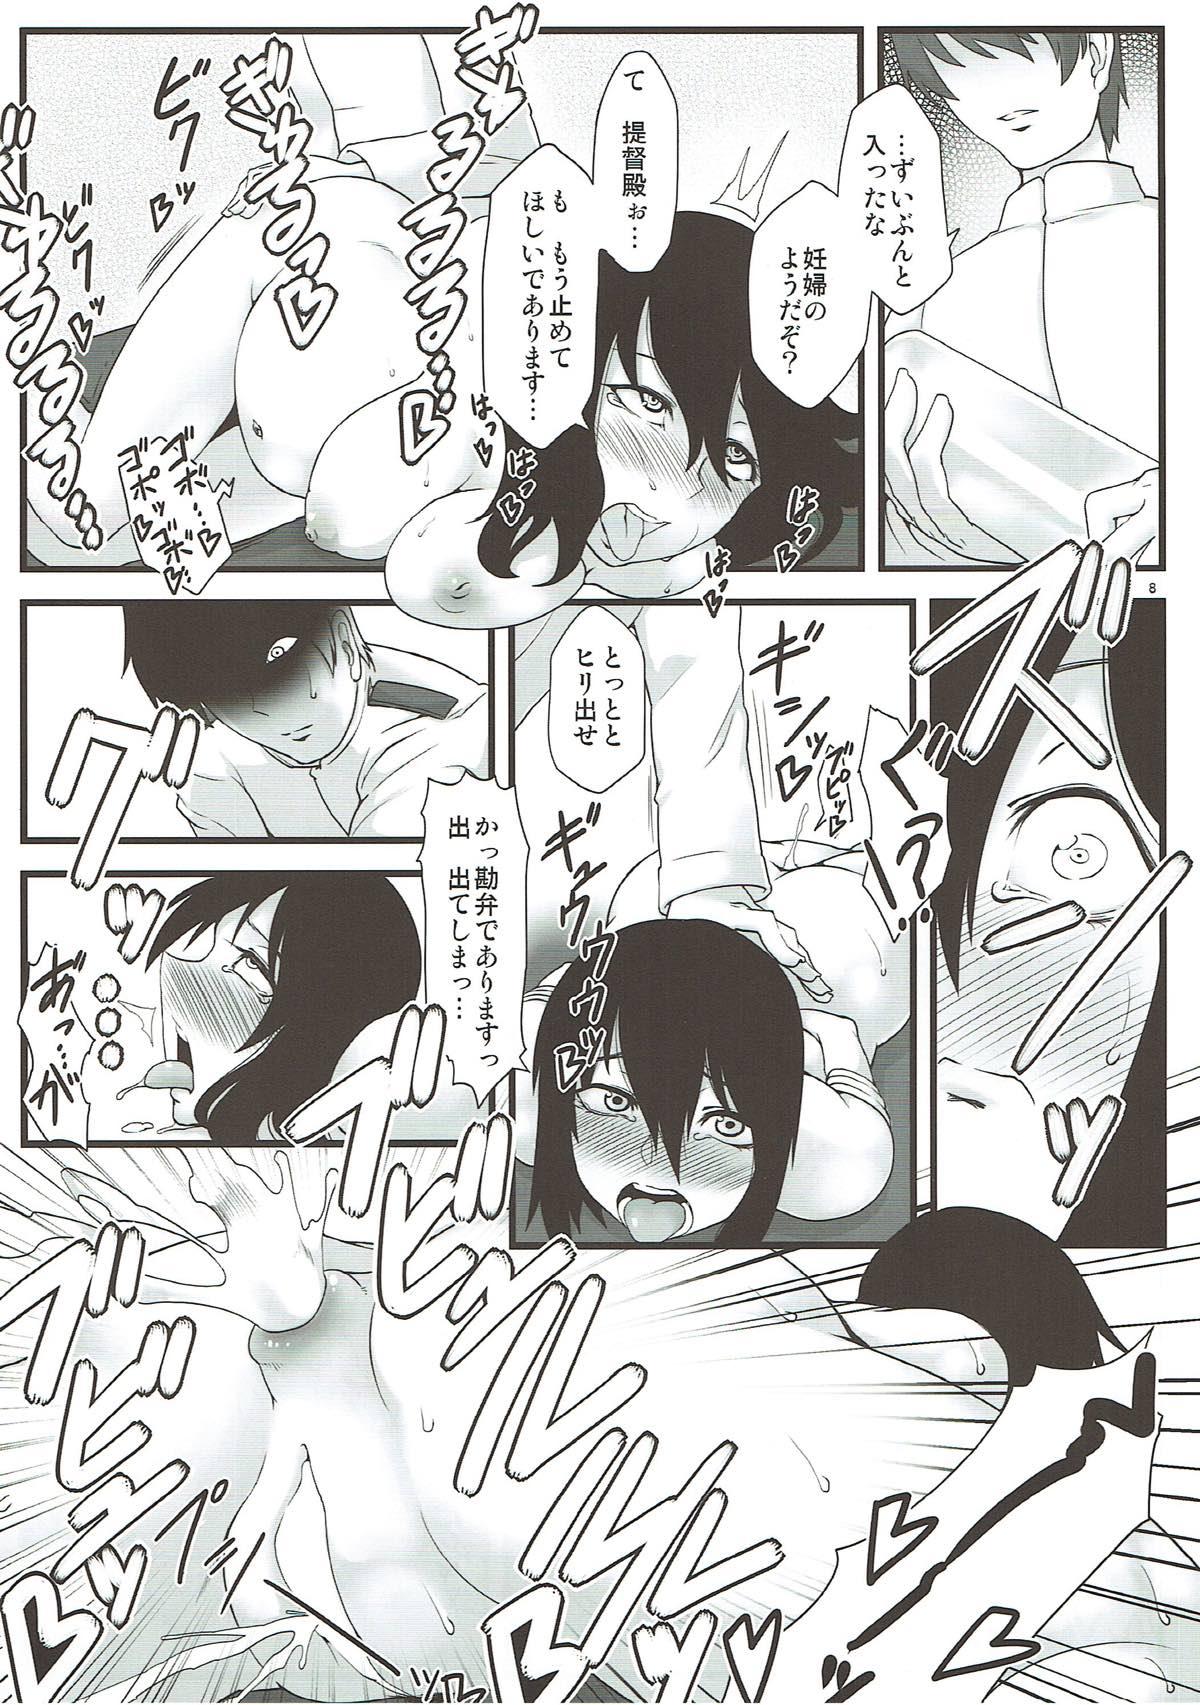 Best Blowjob Ever Higyakusei Black Widow - Kantai collection Sexteen - Page 7